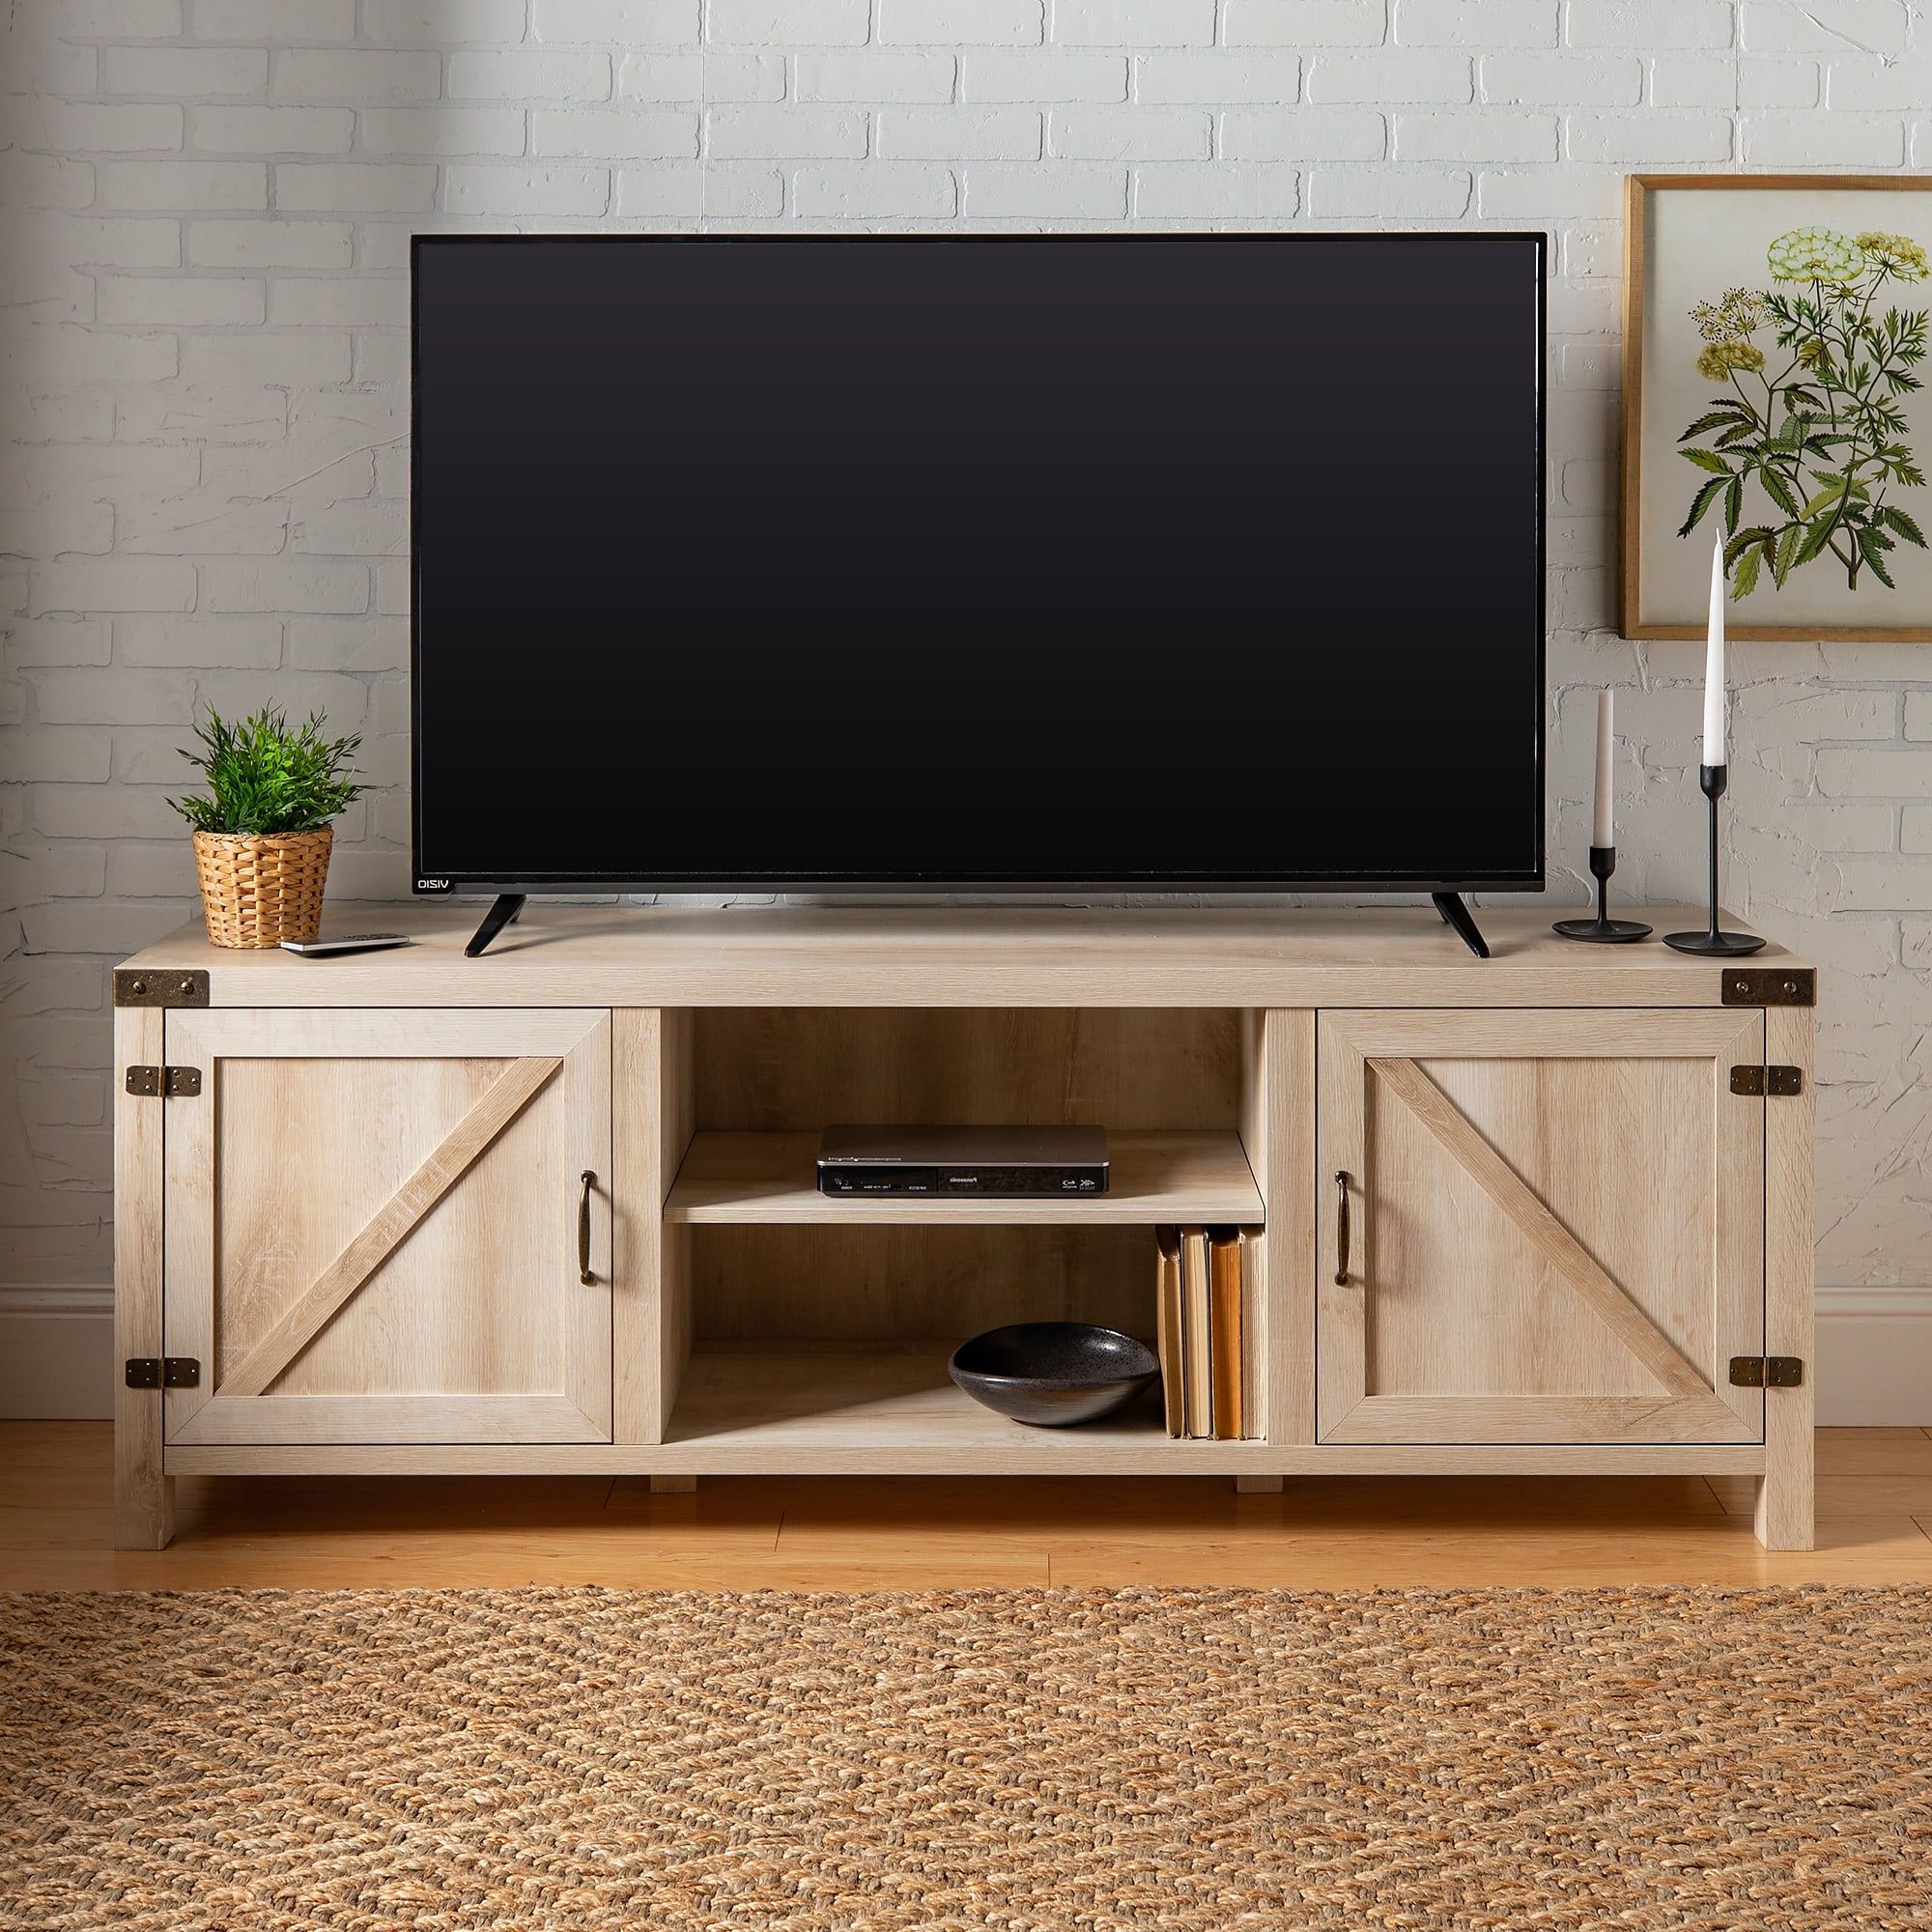 Farmhouse Tv Stands For Most Popular Woven Paths Farmhouse Barn Door Tv Stand For Tvs Up To 80", White Oak (Photo 2 of 15)